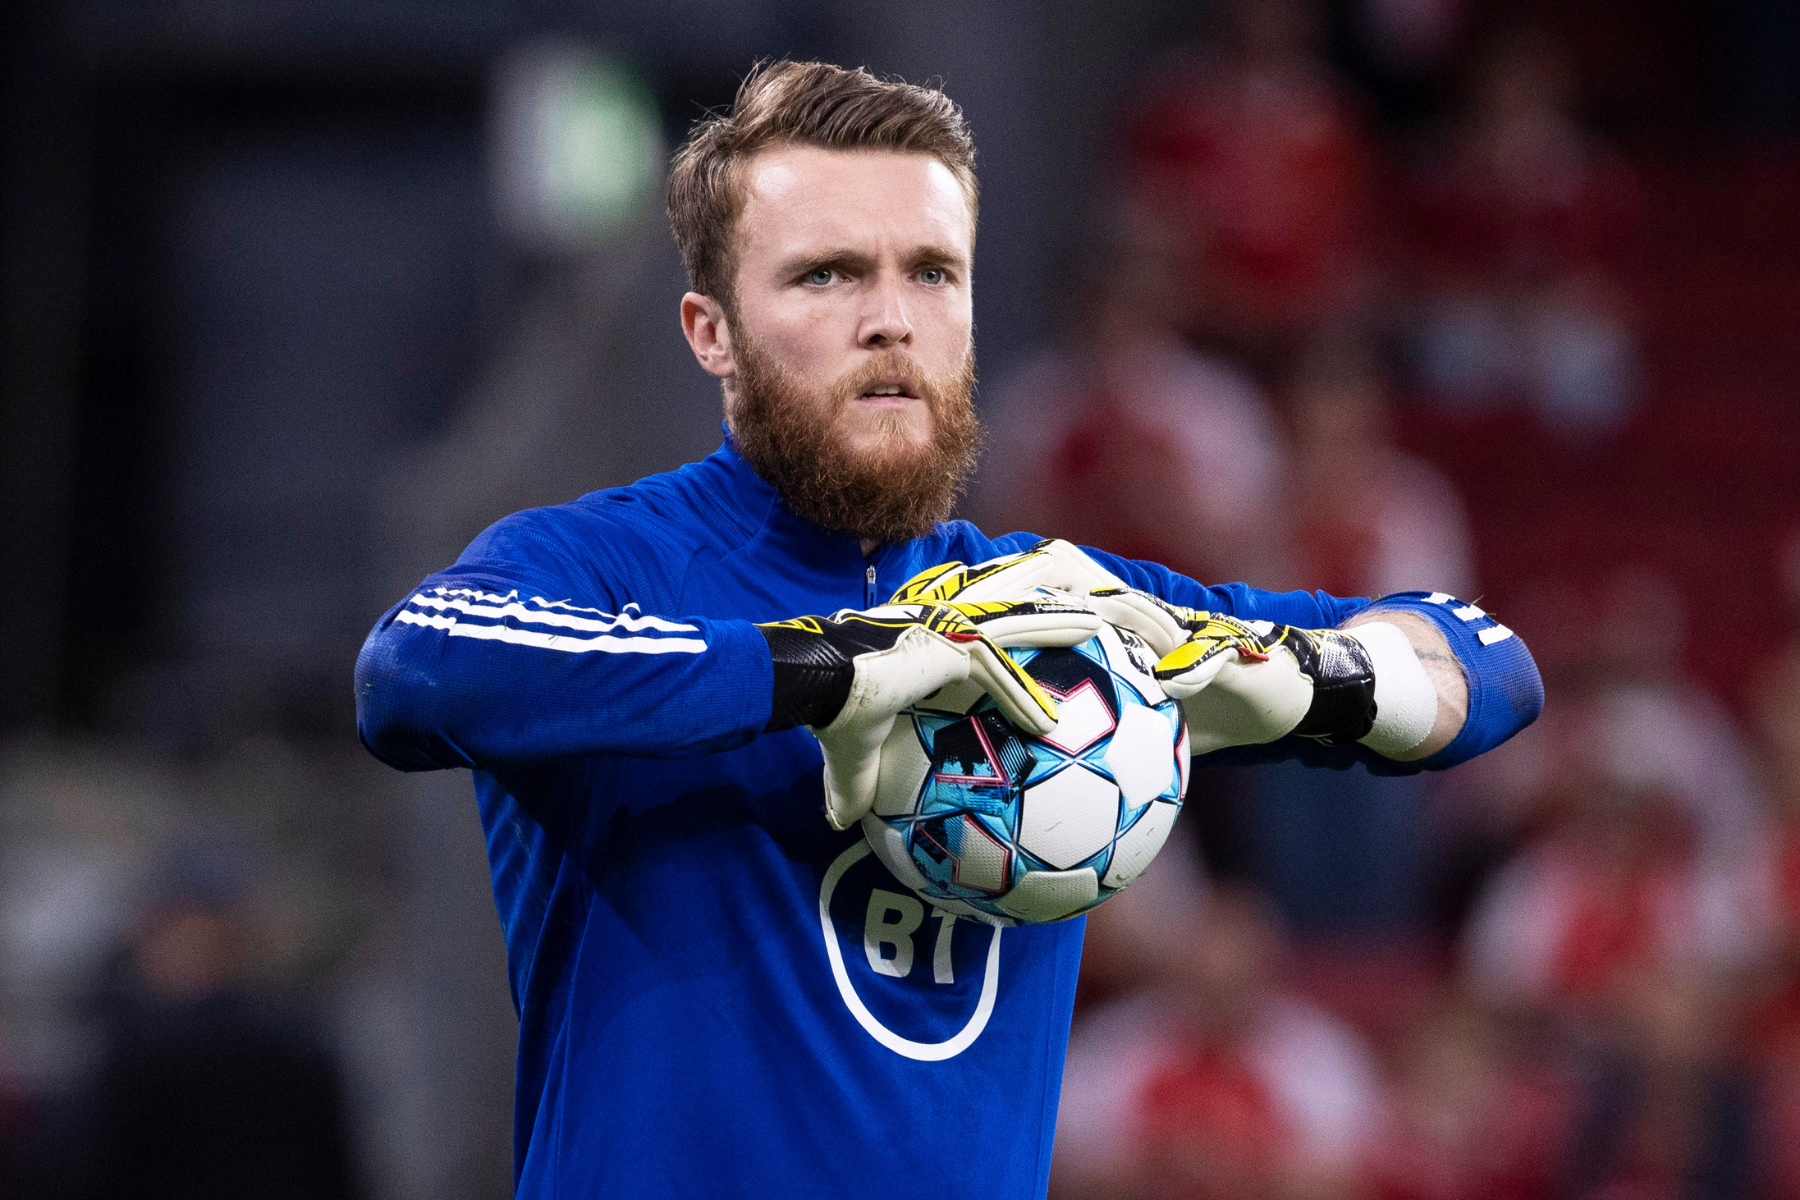 St Johnstone goalkeeper Zander Clark tipped for further Scotland call-up ahead of Moldova and Denmark tests